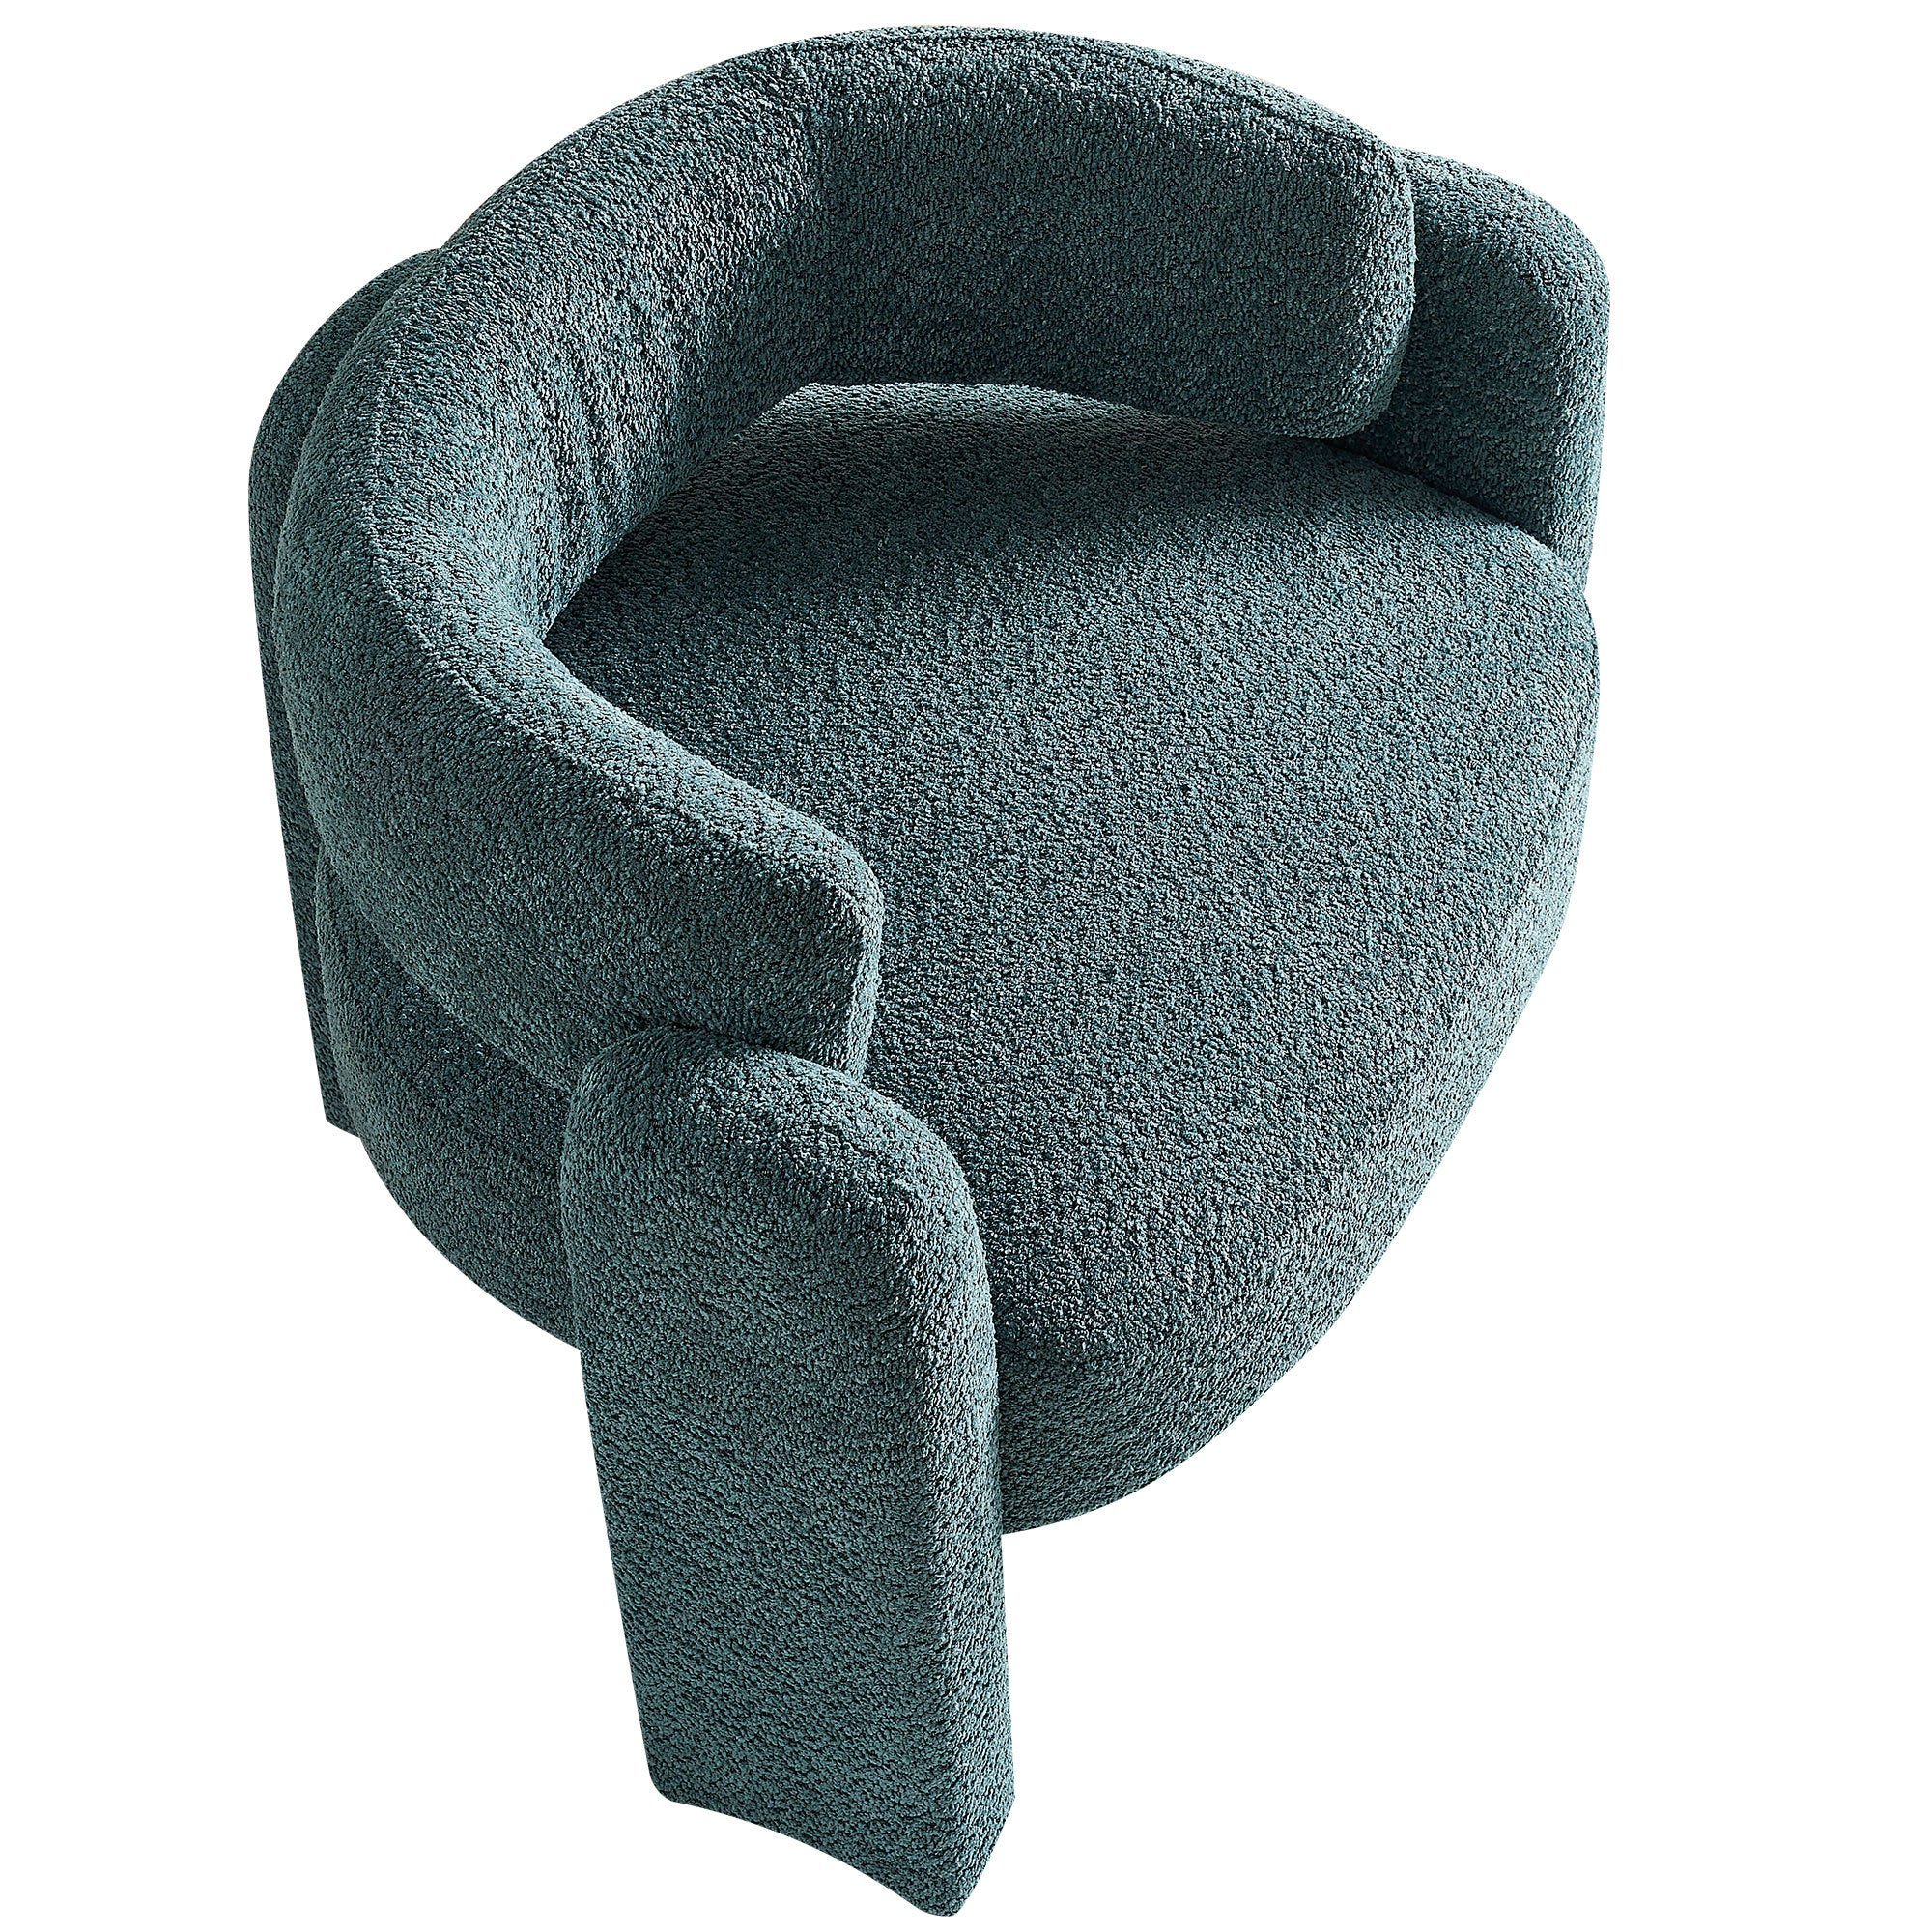 34.65" Wide Boucle Upholstery Accent Chair Green green-primary living space-modern-foam-boucle